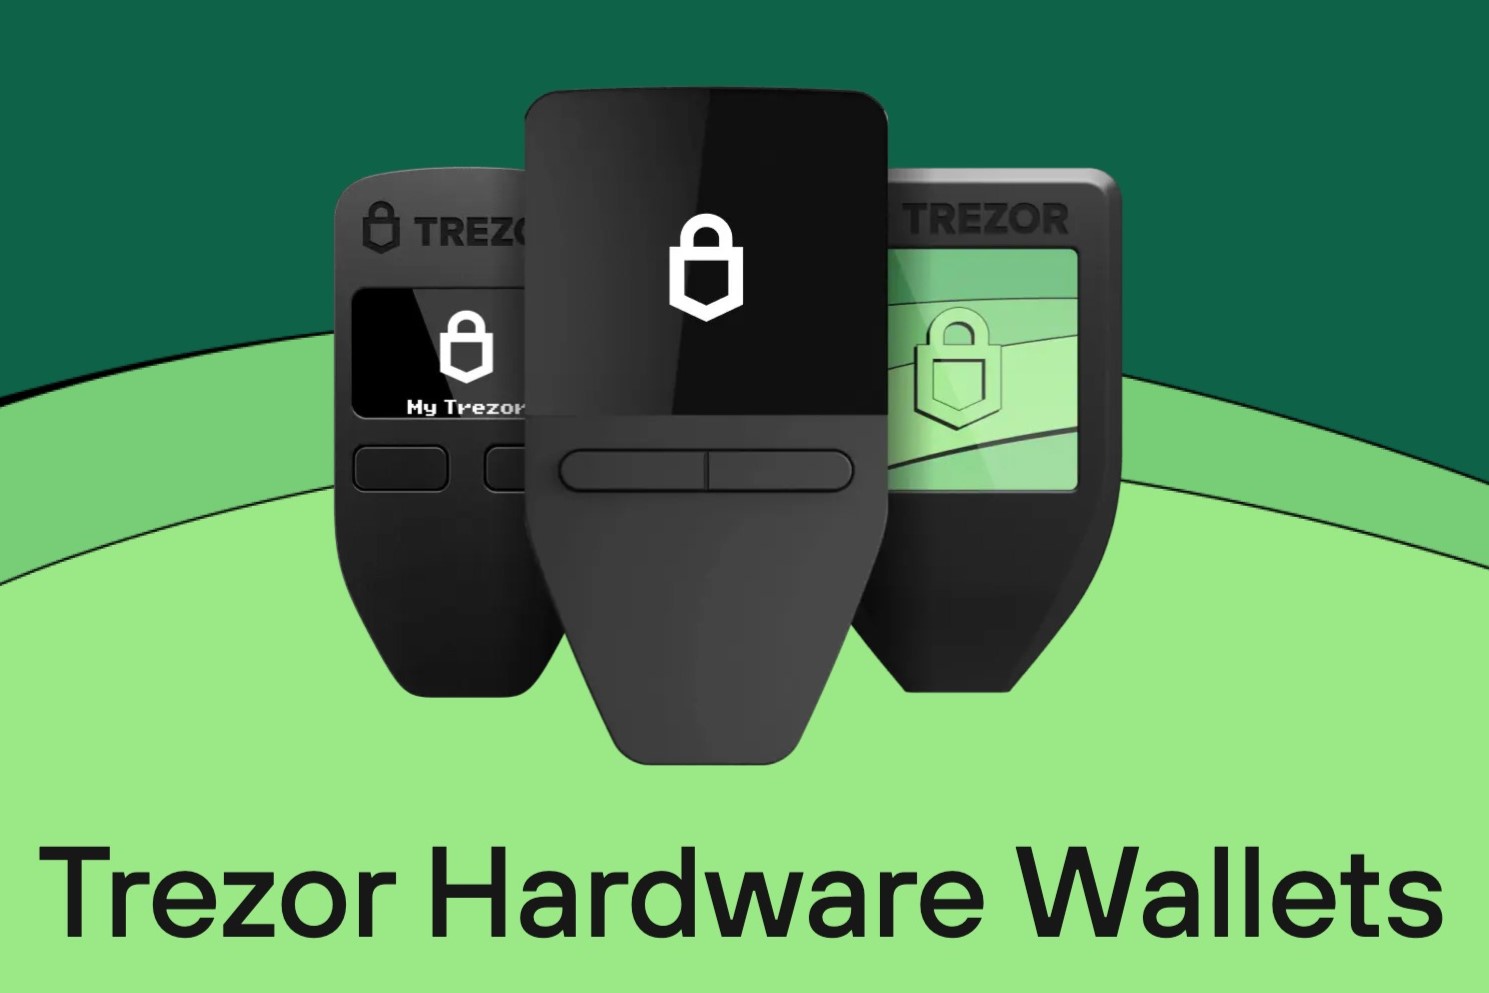 What Is The Trezor Wallet